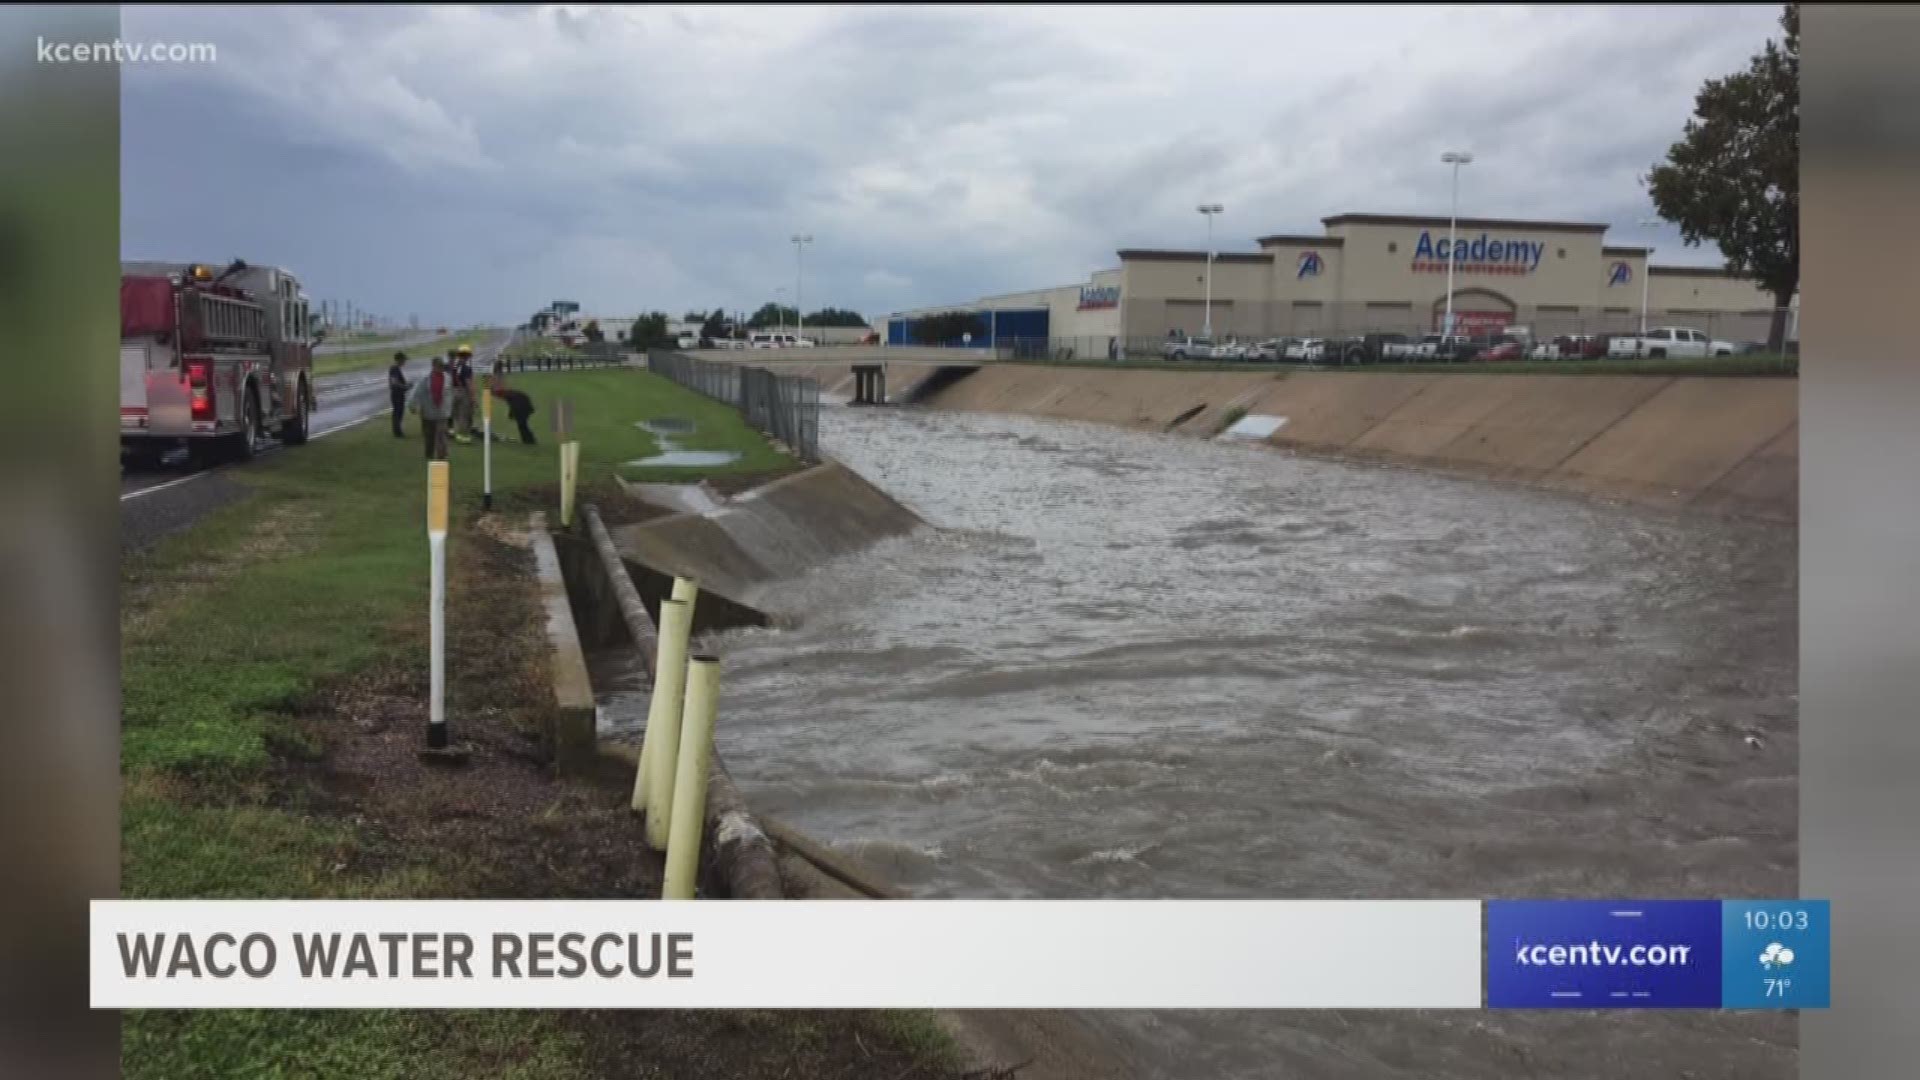 Two men were rescued after being stranded in a creek during rising waters.